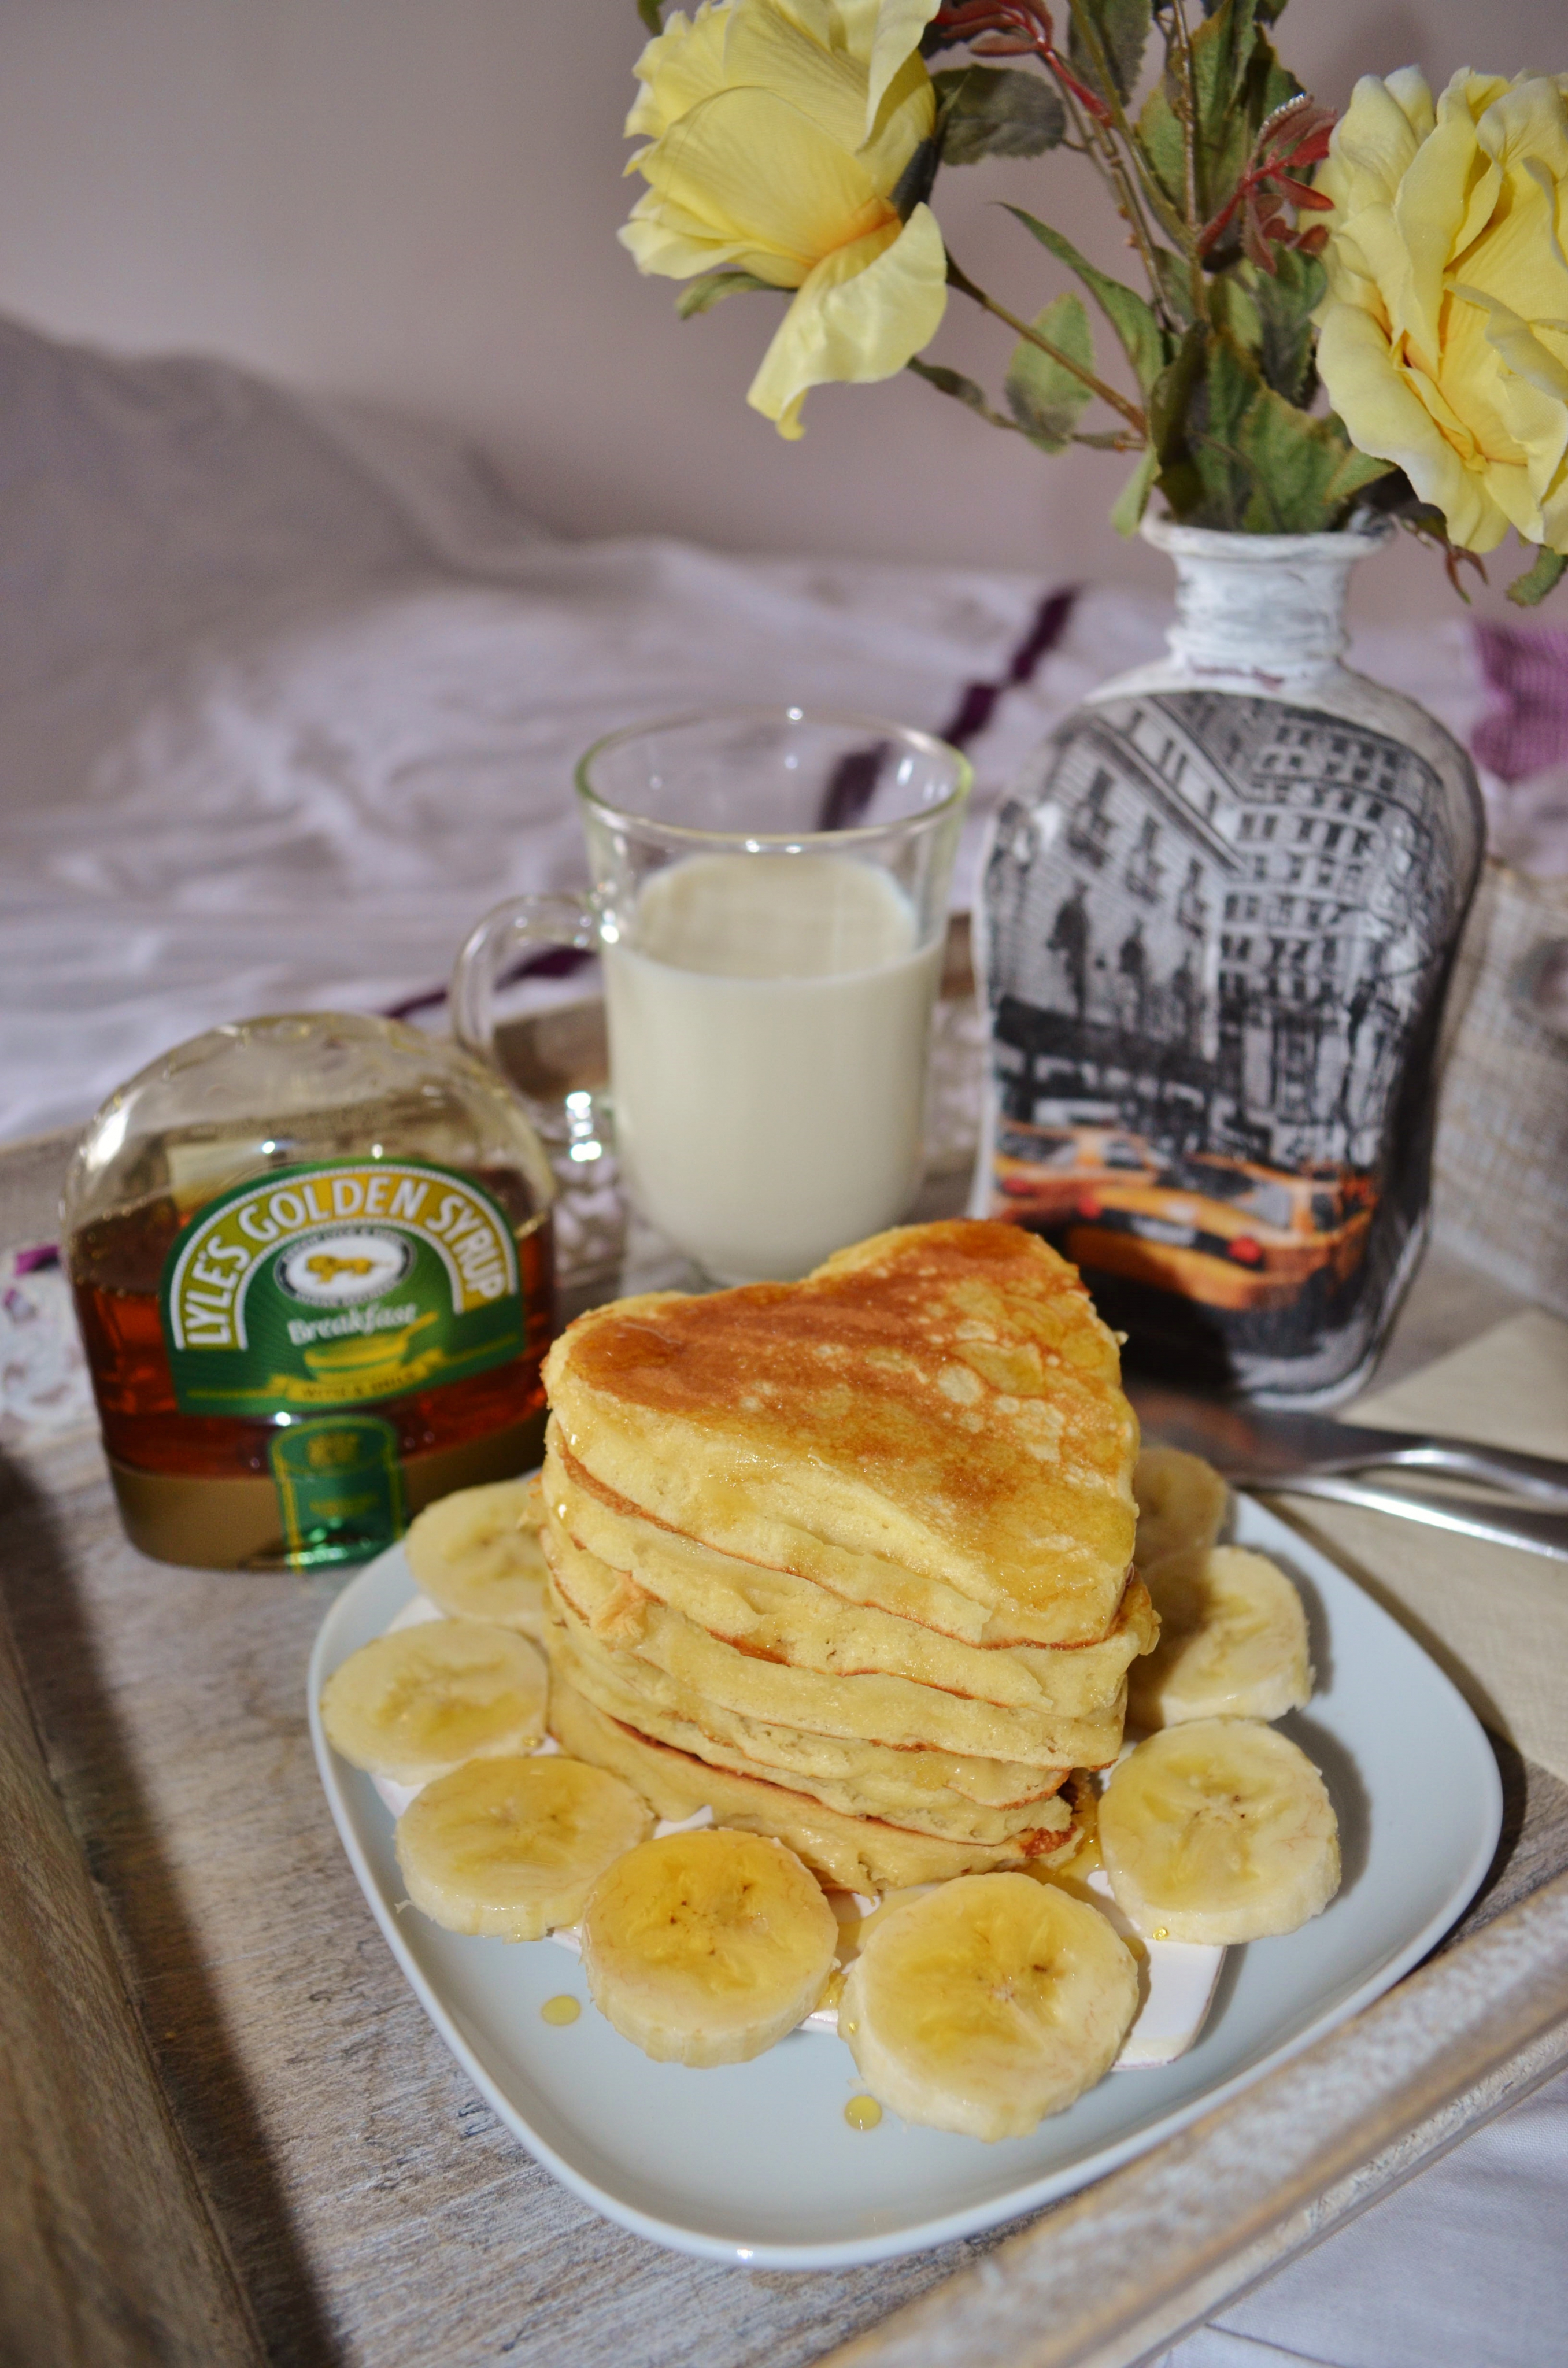 American breakfast: pancakes with Golden Syrup!